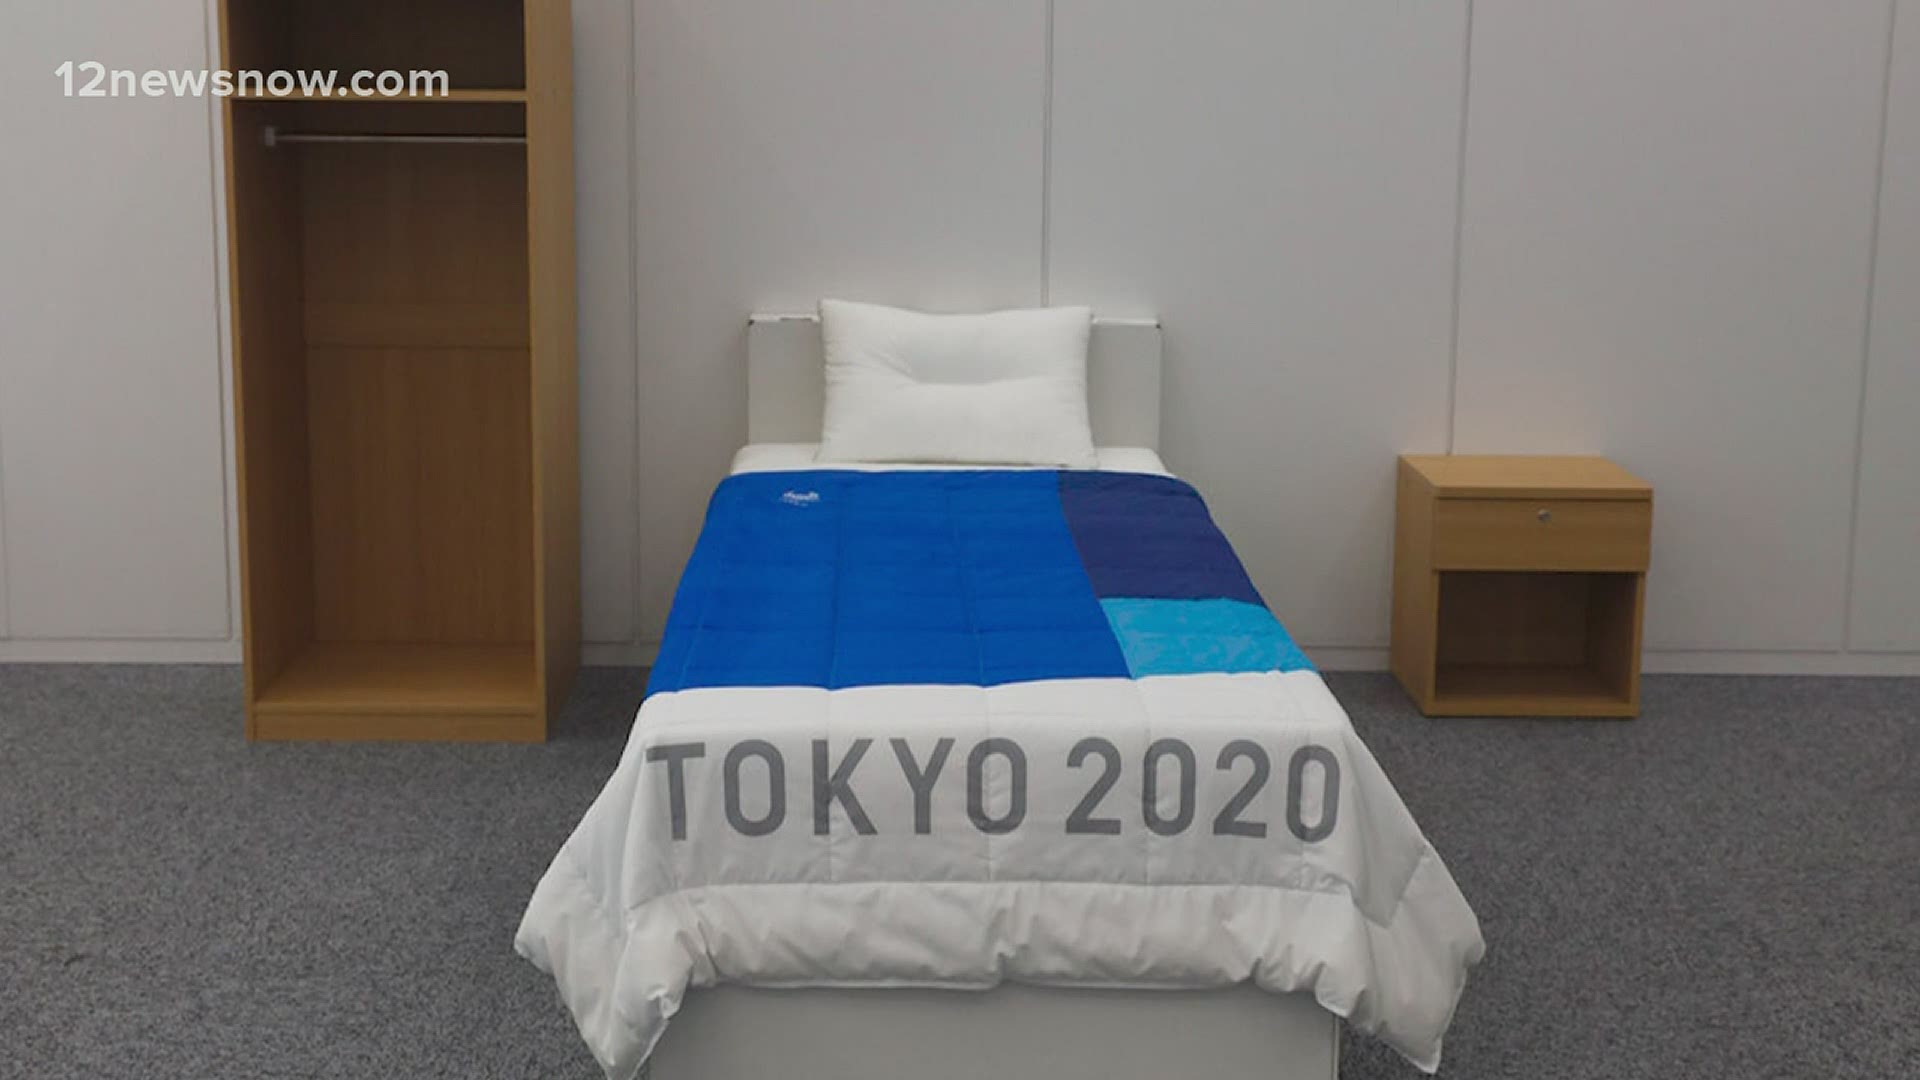 The question comes after an American distance runner claimed in a viral tweet that the beds are made out of cardboard to prevent intimacy.